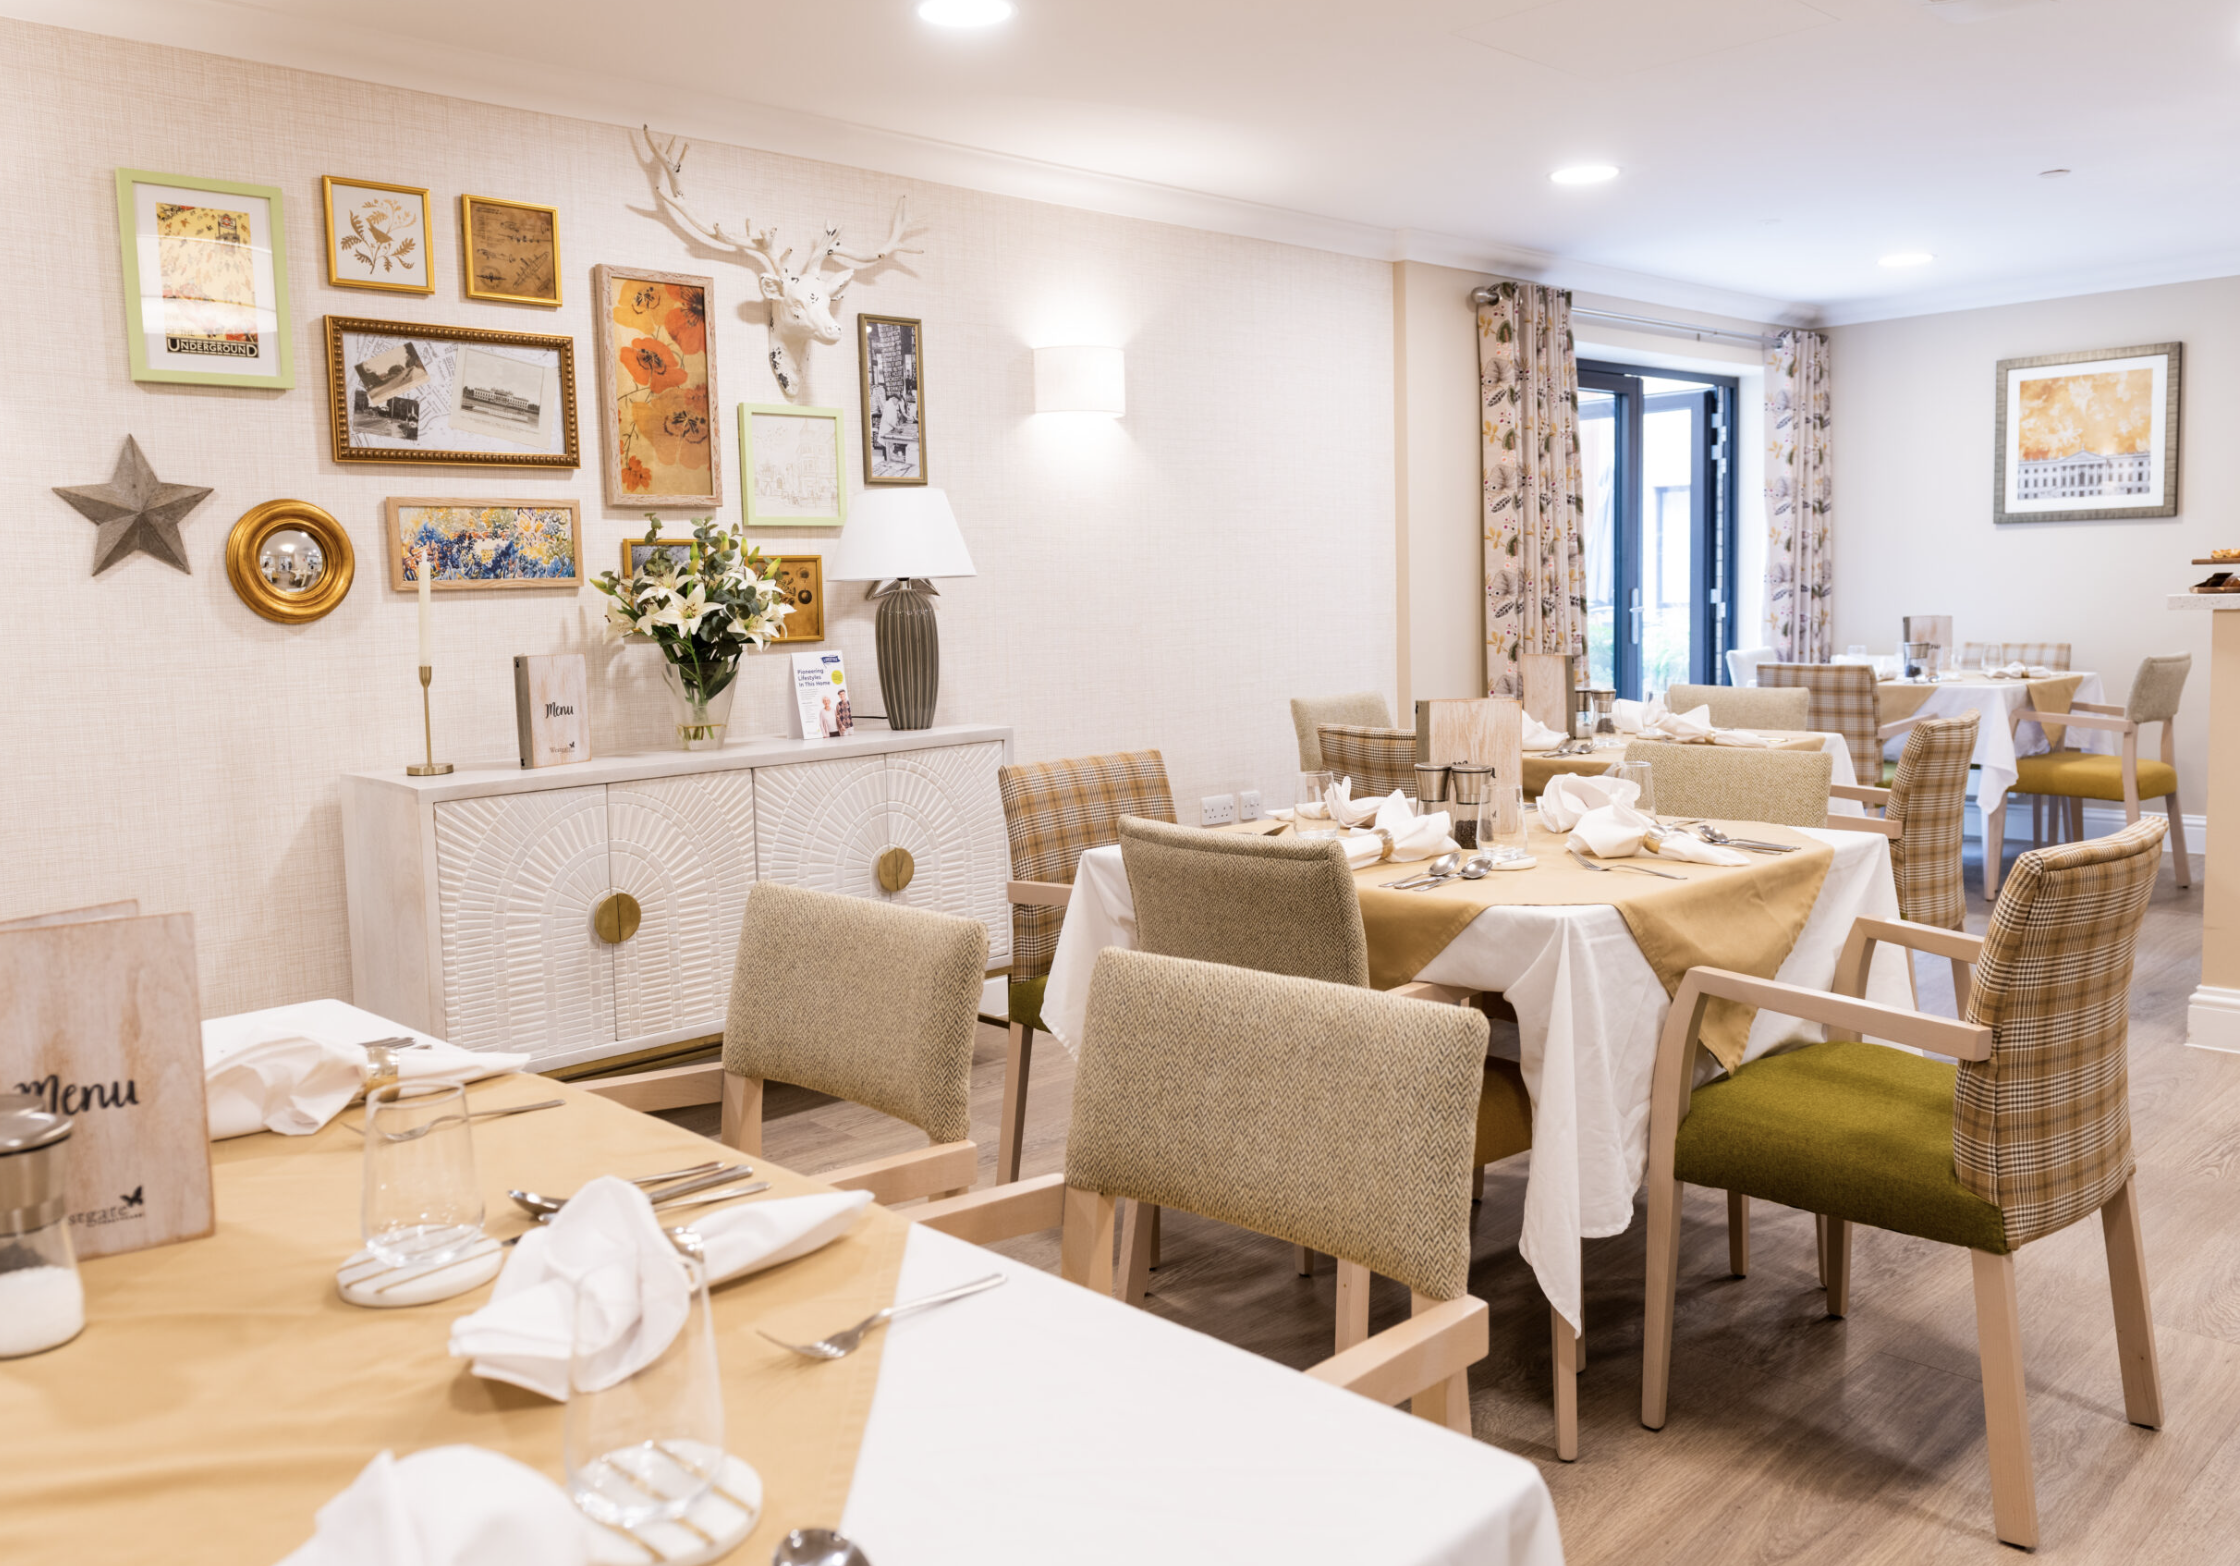 Dining area of Chestnut Manor care home in Wanstead, London